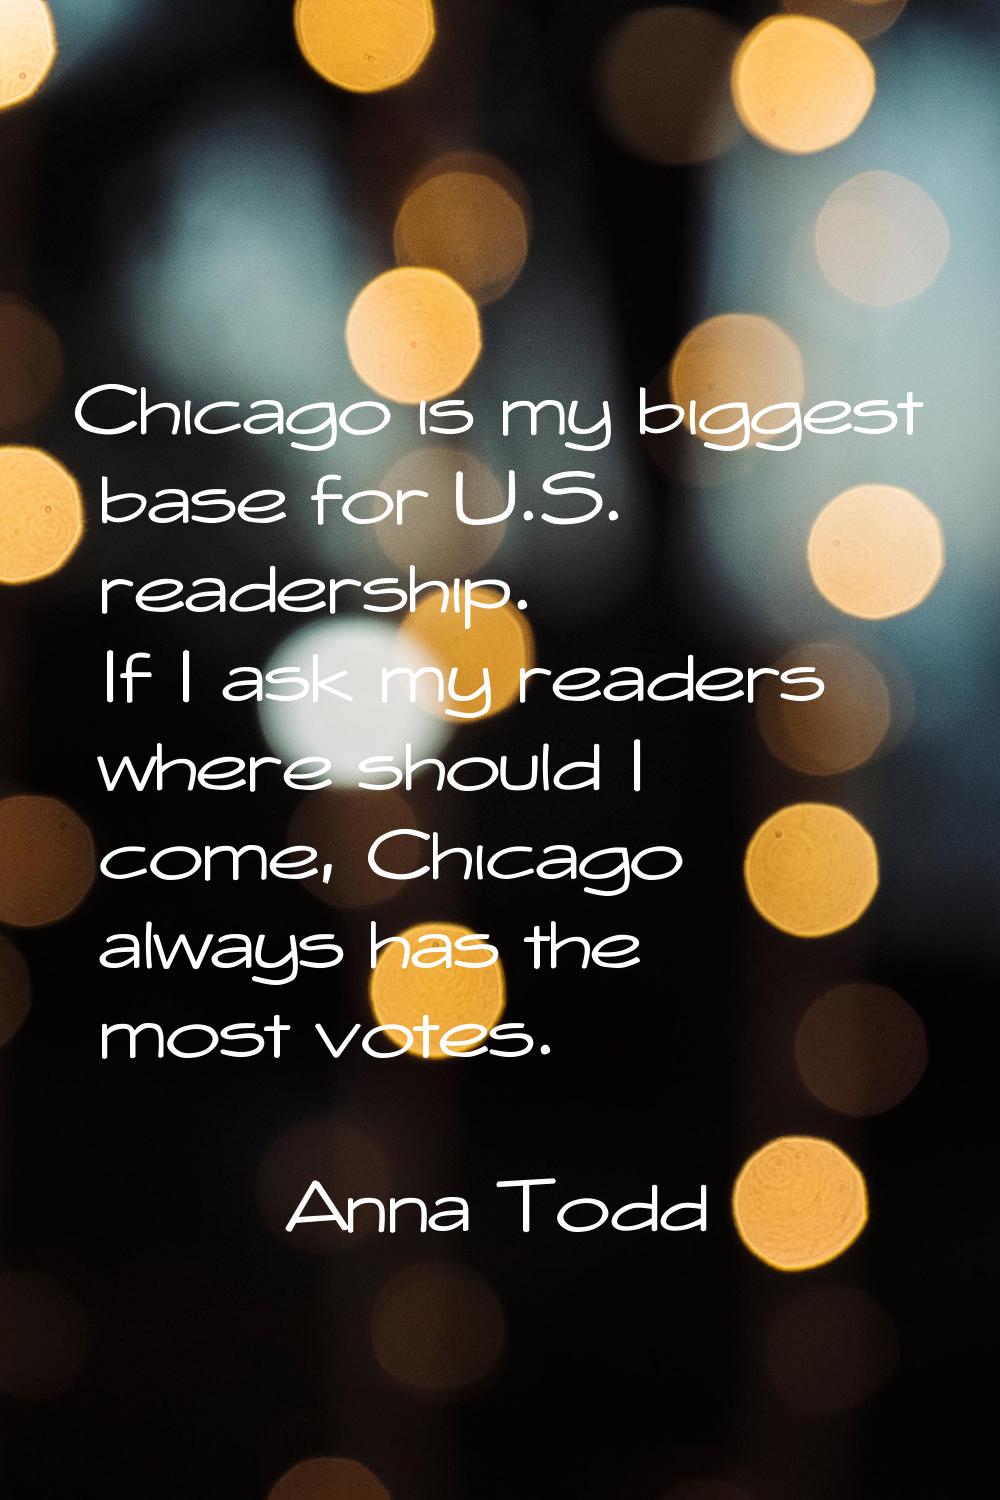 Chicago is my biggest base for U.S. readership. If I ask my readers where should I come, Chicago al